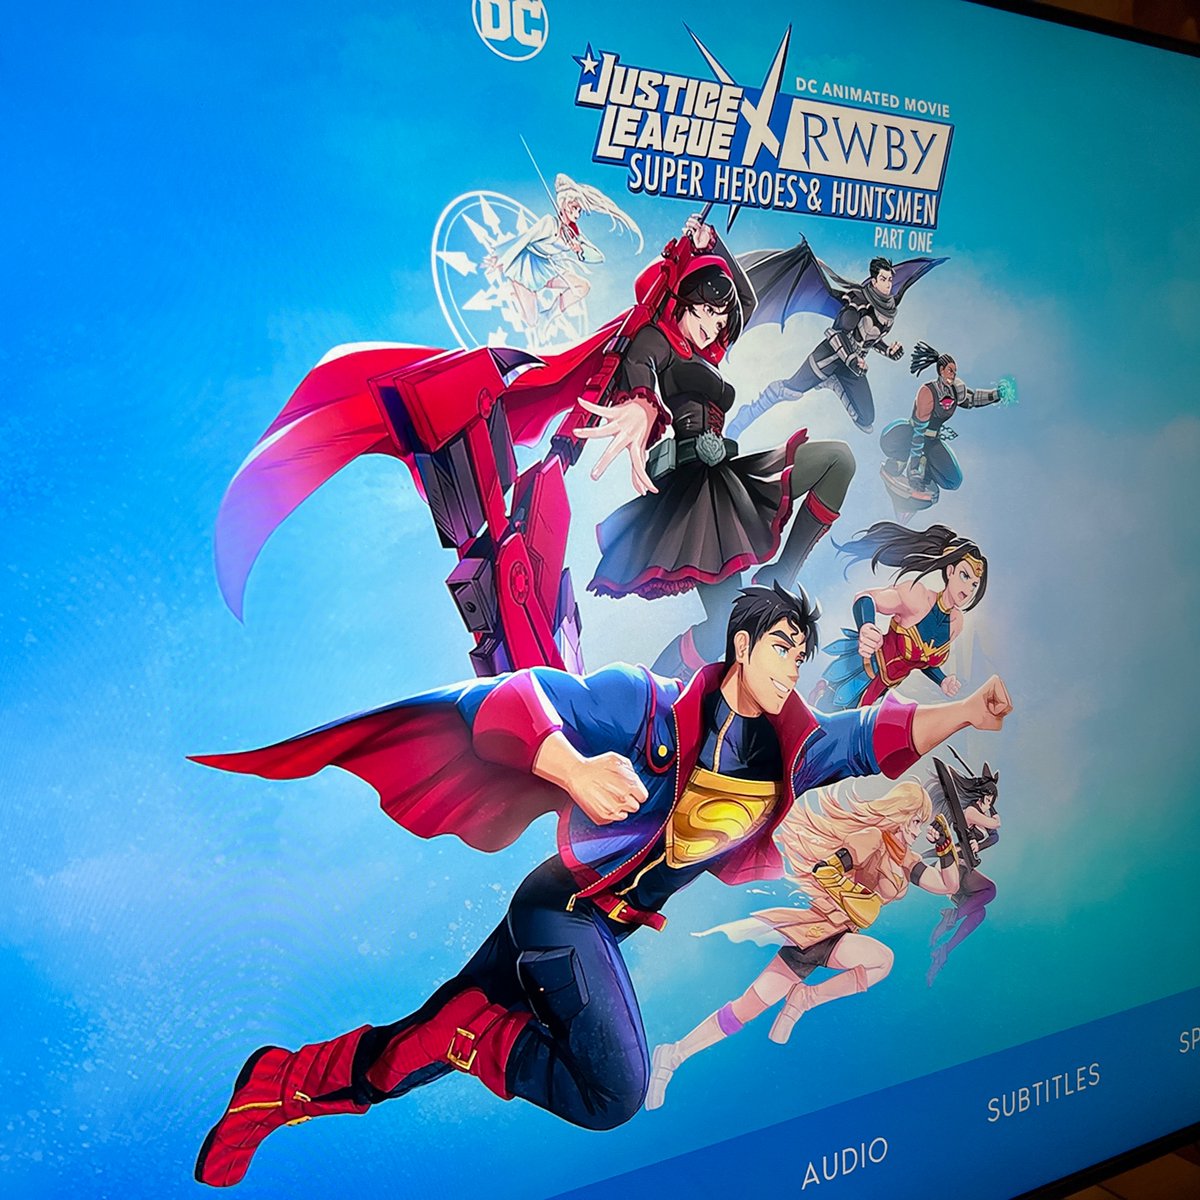 Probably going to have to jump in and out of this, but here’s my first time watchthread of #JLxRWBYSpoilers 

As someone who’s read nearly every Justice League comic ever and is a big fan of Rwby, I’m excited to see how this goes!